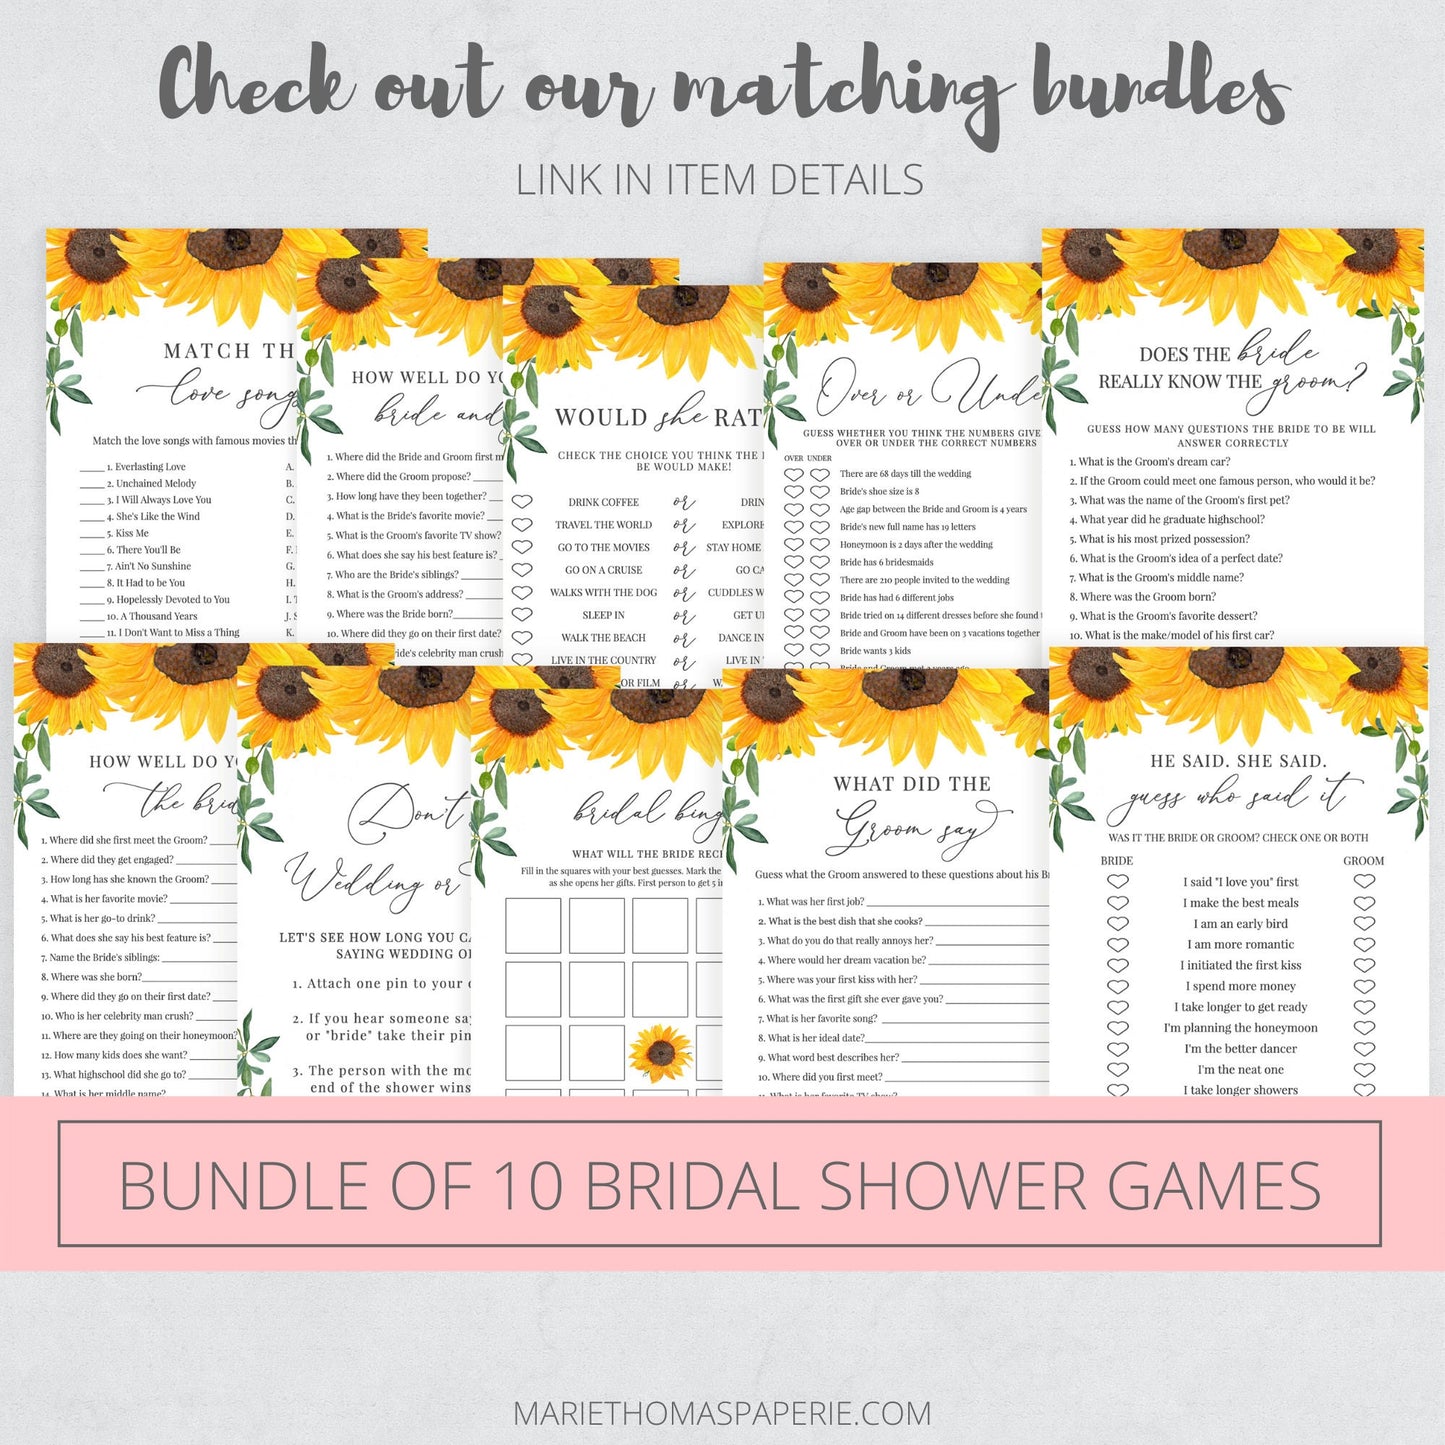 Editable   Advice for the Bride Bridal Shower Games Sunflower Advice Cards Template